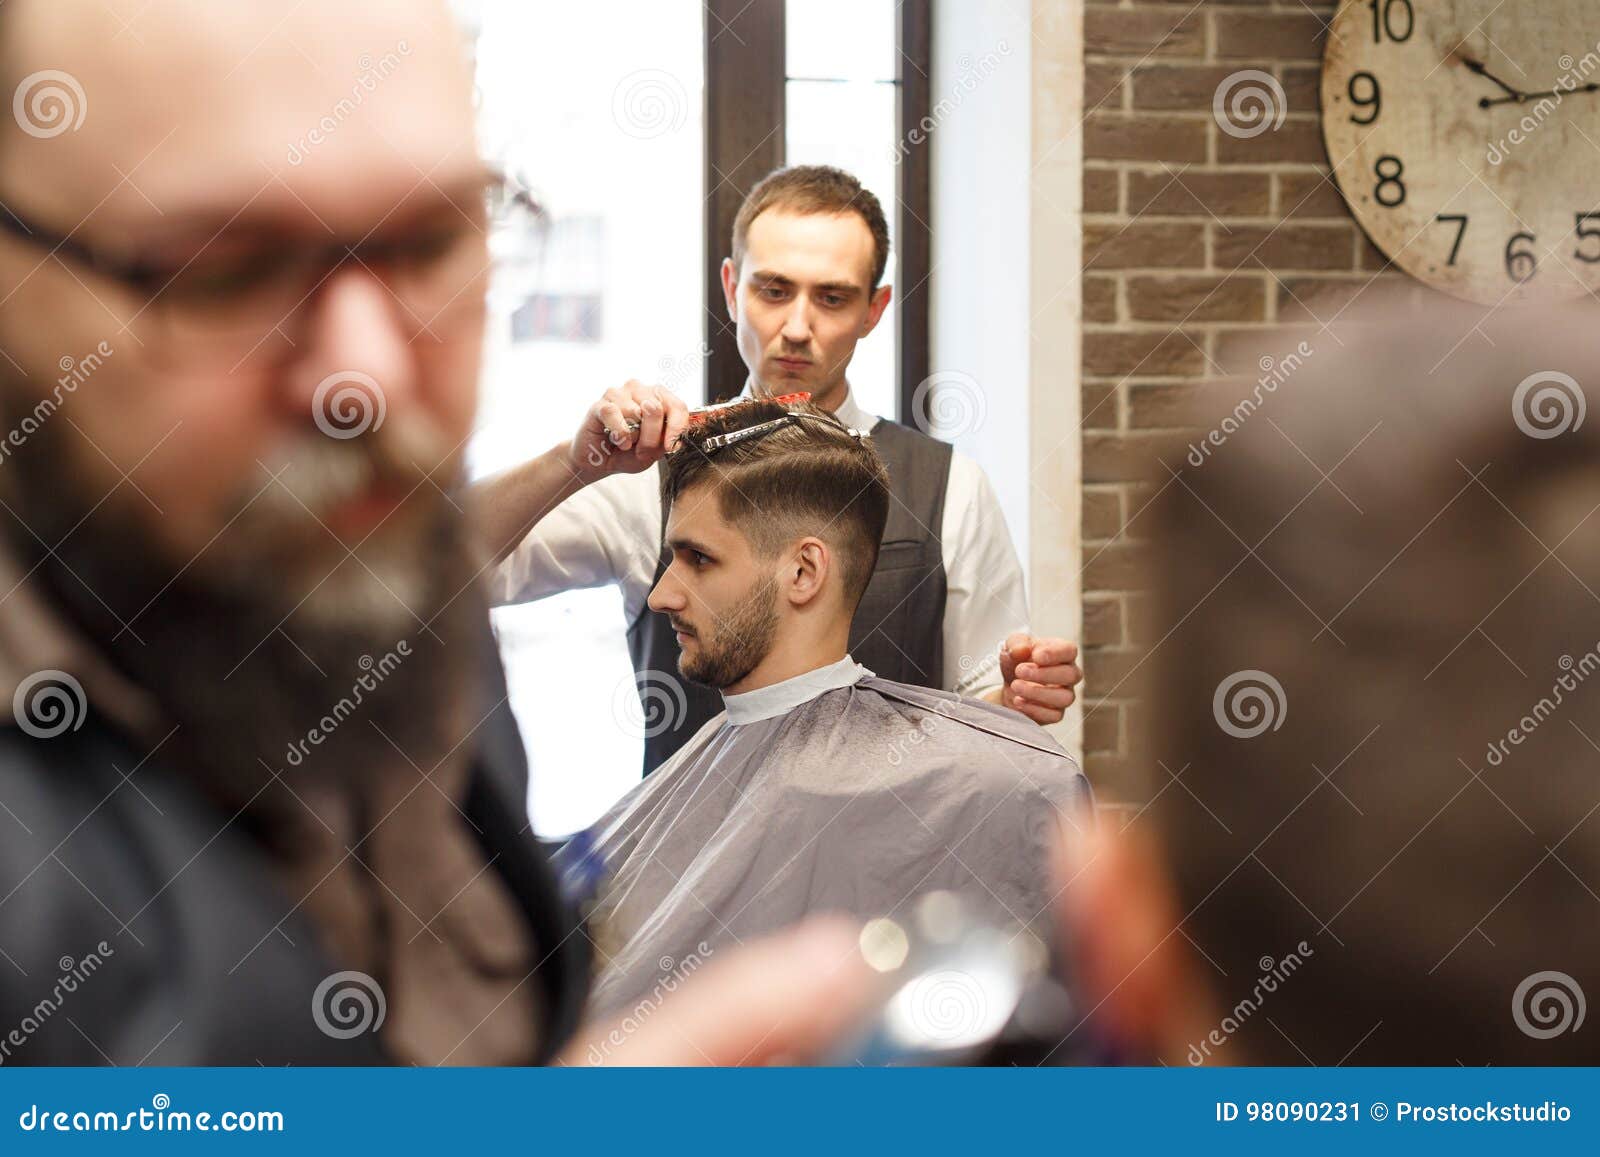 Man Getting Haircut By Hairstylist At Barbershop Stock Image